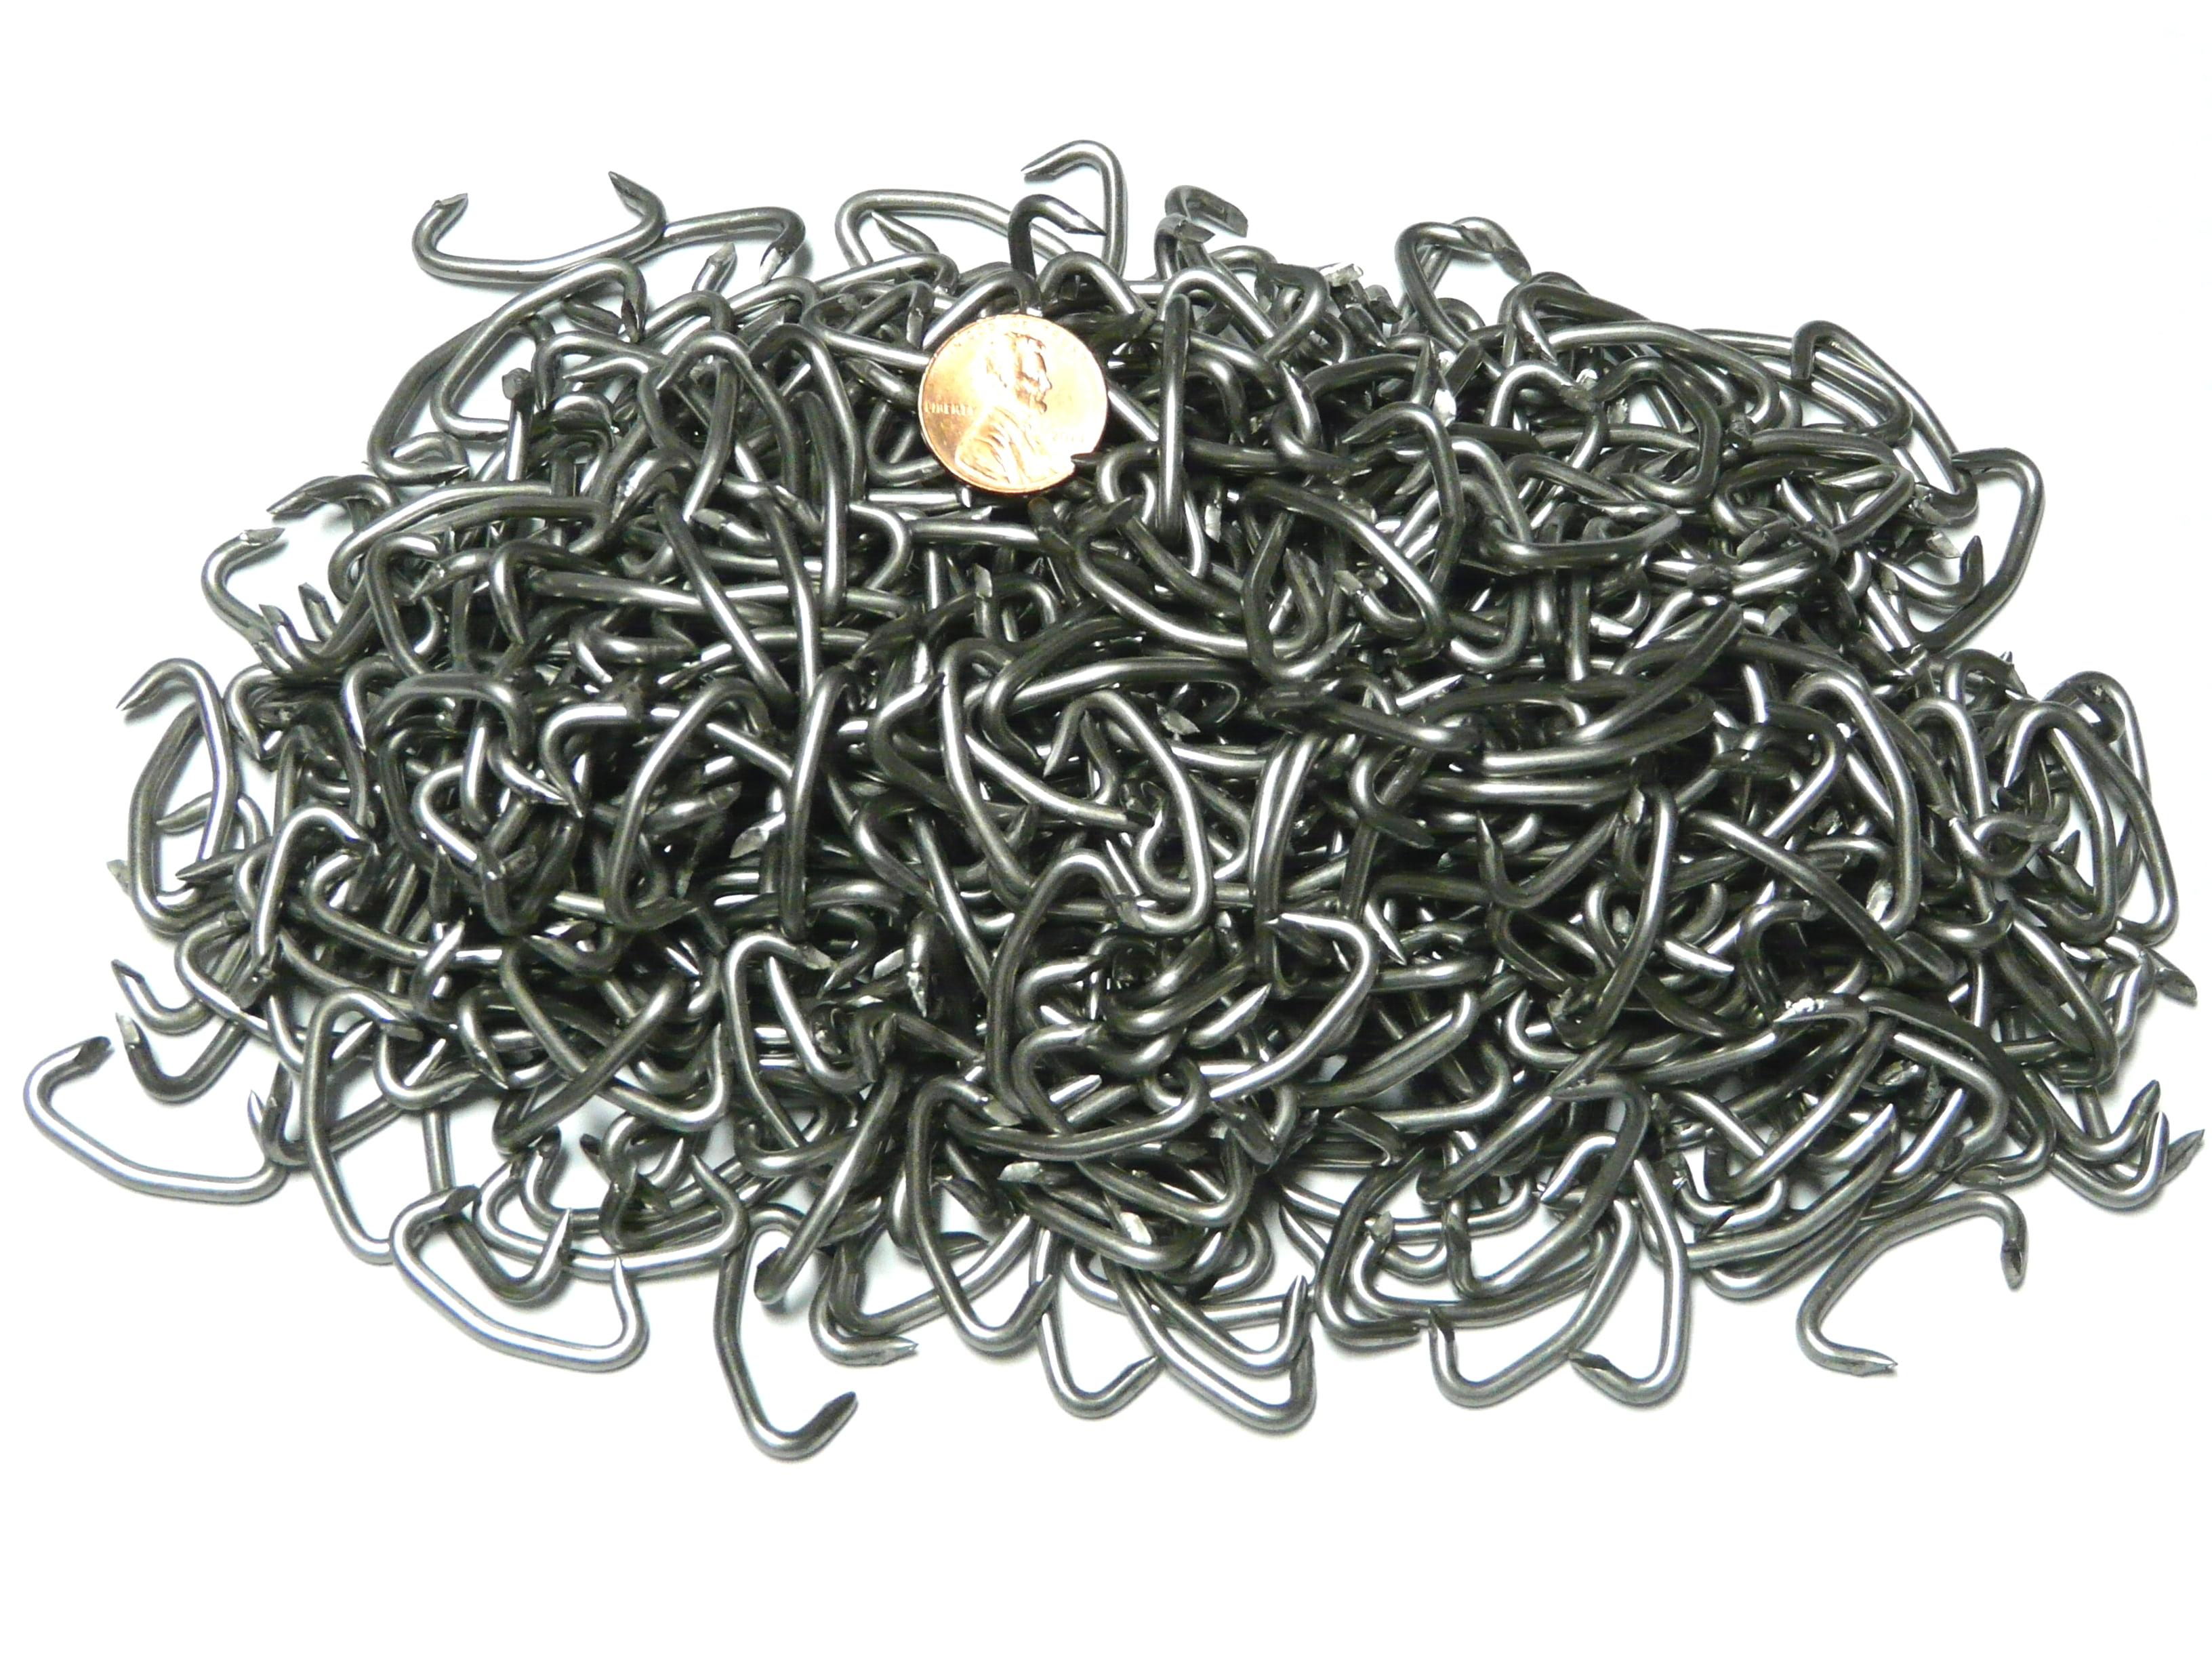 500 count bag-11oz 3//8 Galvanized Hog Rings for Rabbit cages traps fencing and dozens more uses around the farm /& home sausage casings